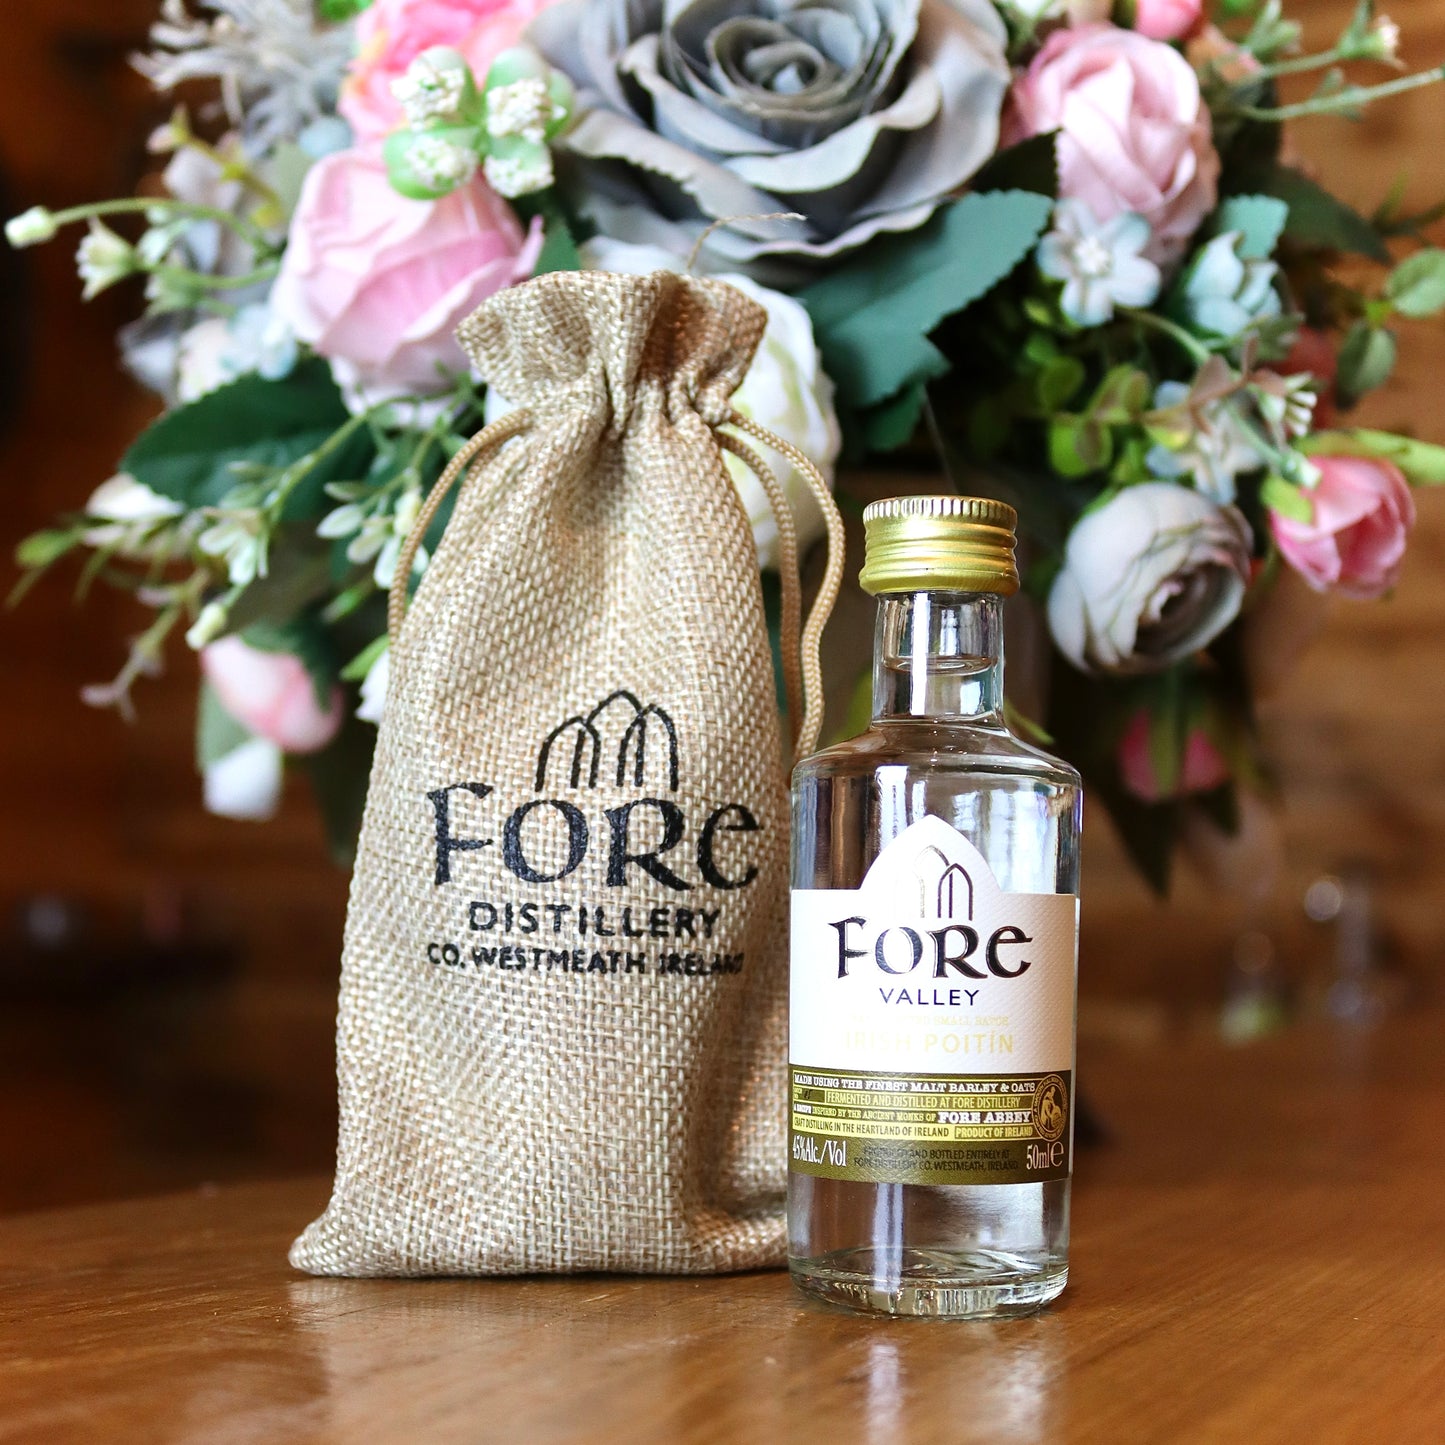 Fore Valley Alcohol 50ml Poitín Wedding Favours